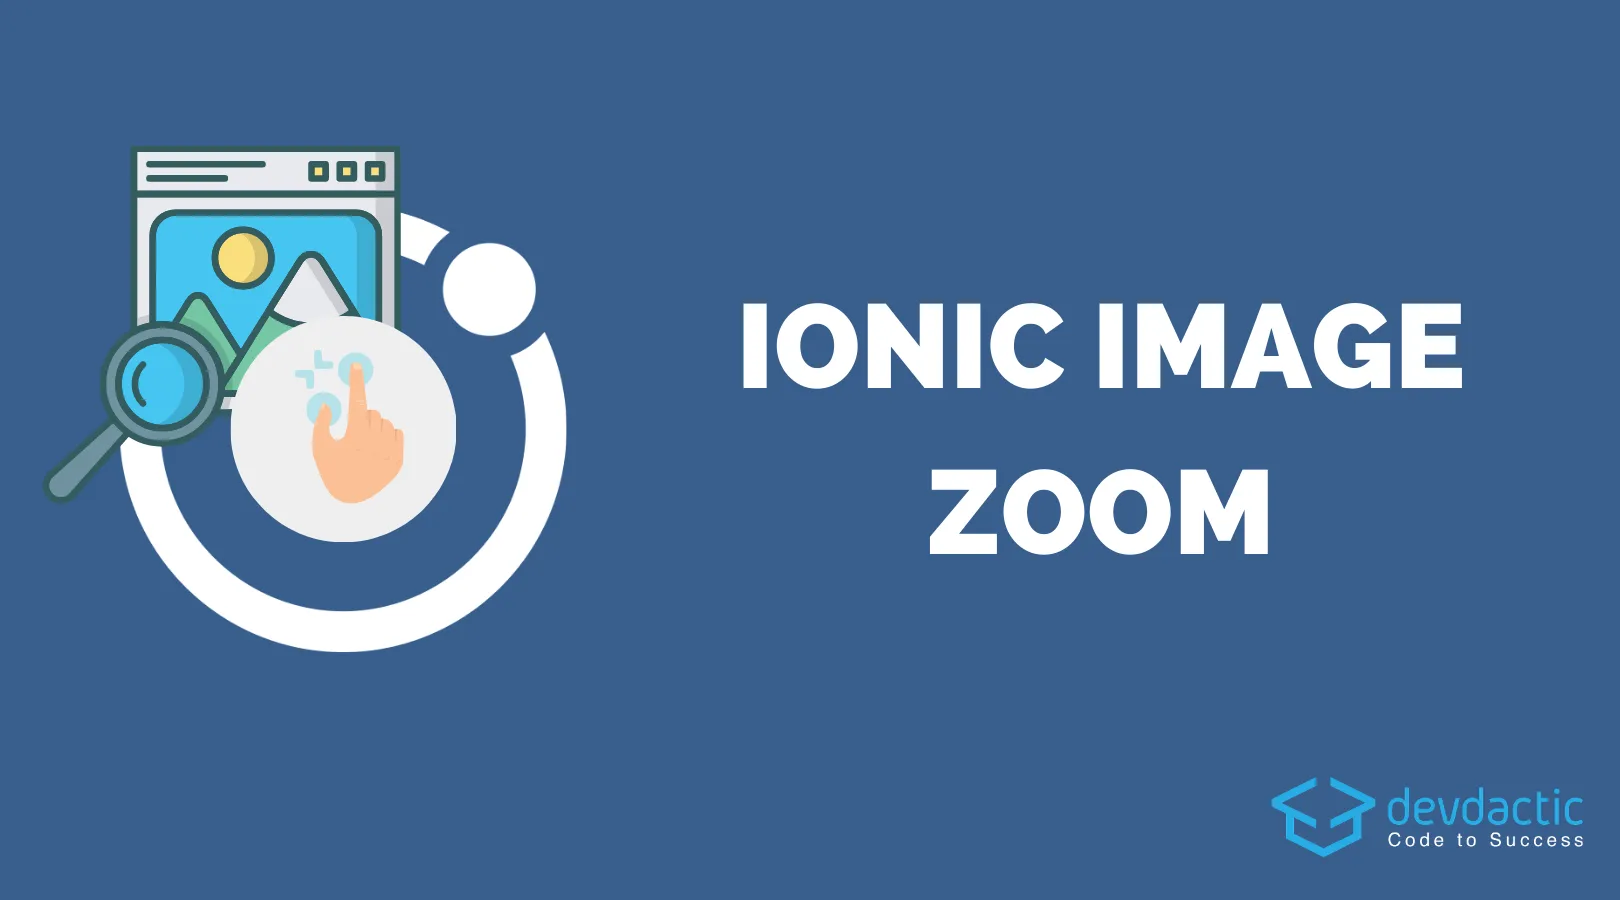 The Essential Ionic Image Zoom Guide (Modal & Cards)